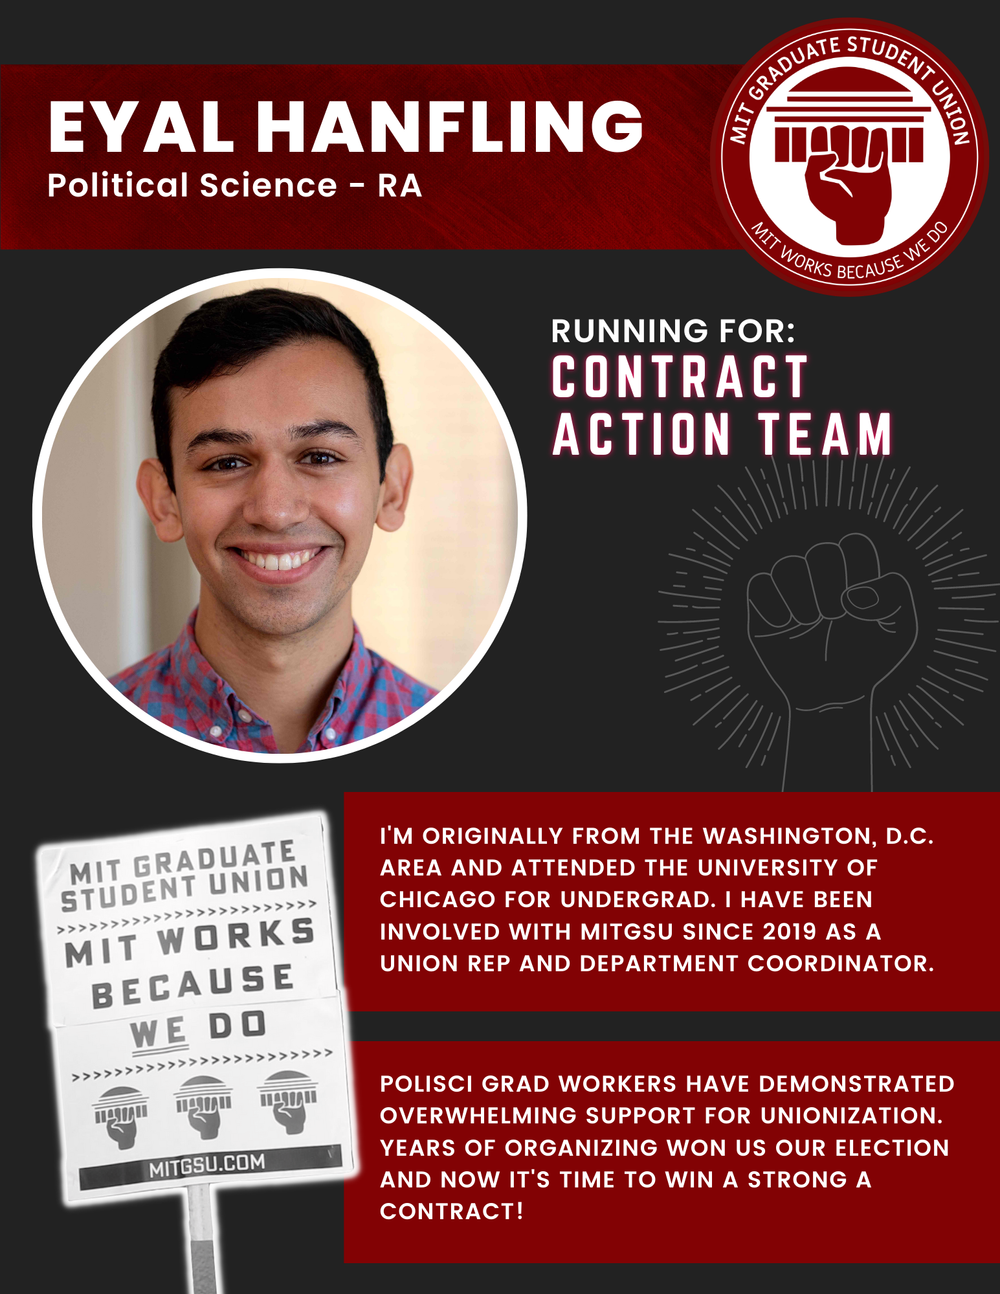  EYAL HANFLING Political Science - RA   RUNNING FOR: Contract Action Team  I'M ORIGINALLY FROM THE WASHINGTON, D.C. AREA AND ATTENDED THE UNIVERSITY OF CHICAGO FOR UNDERGRAD. I HAVE BEEN INVOLVED WITH MITGSU SINCE 2019 AS A UNION REP AND DEPARTMENT C